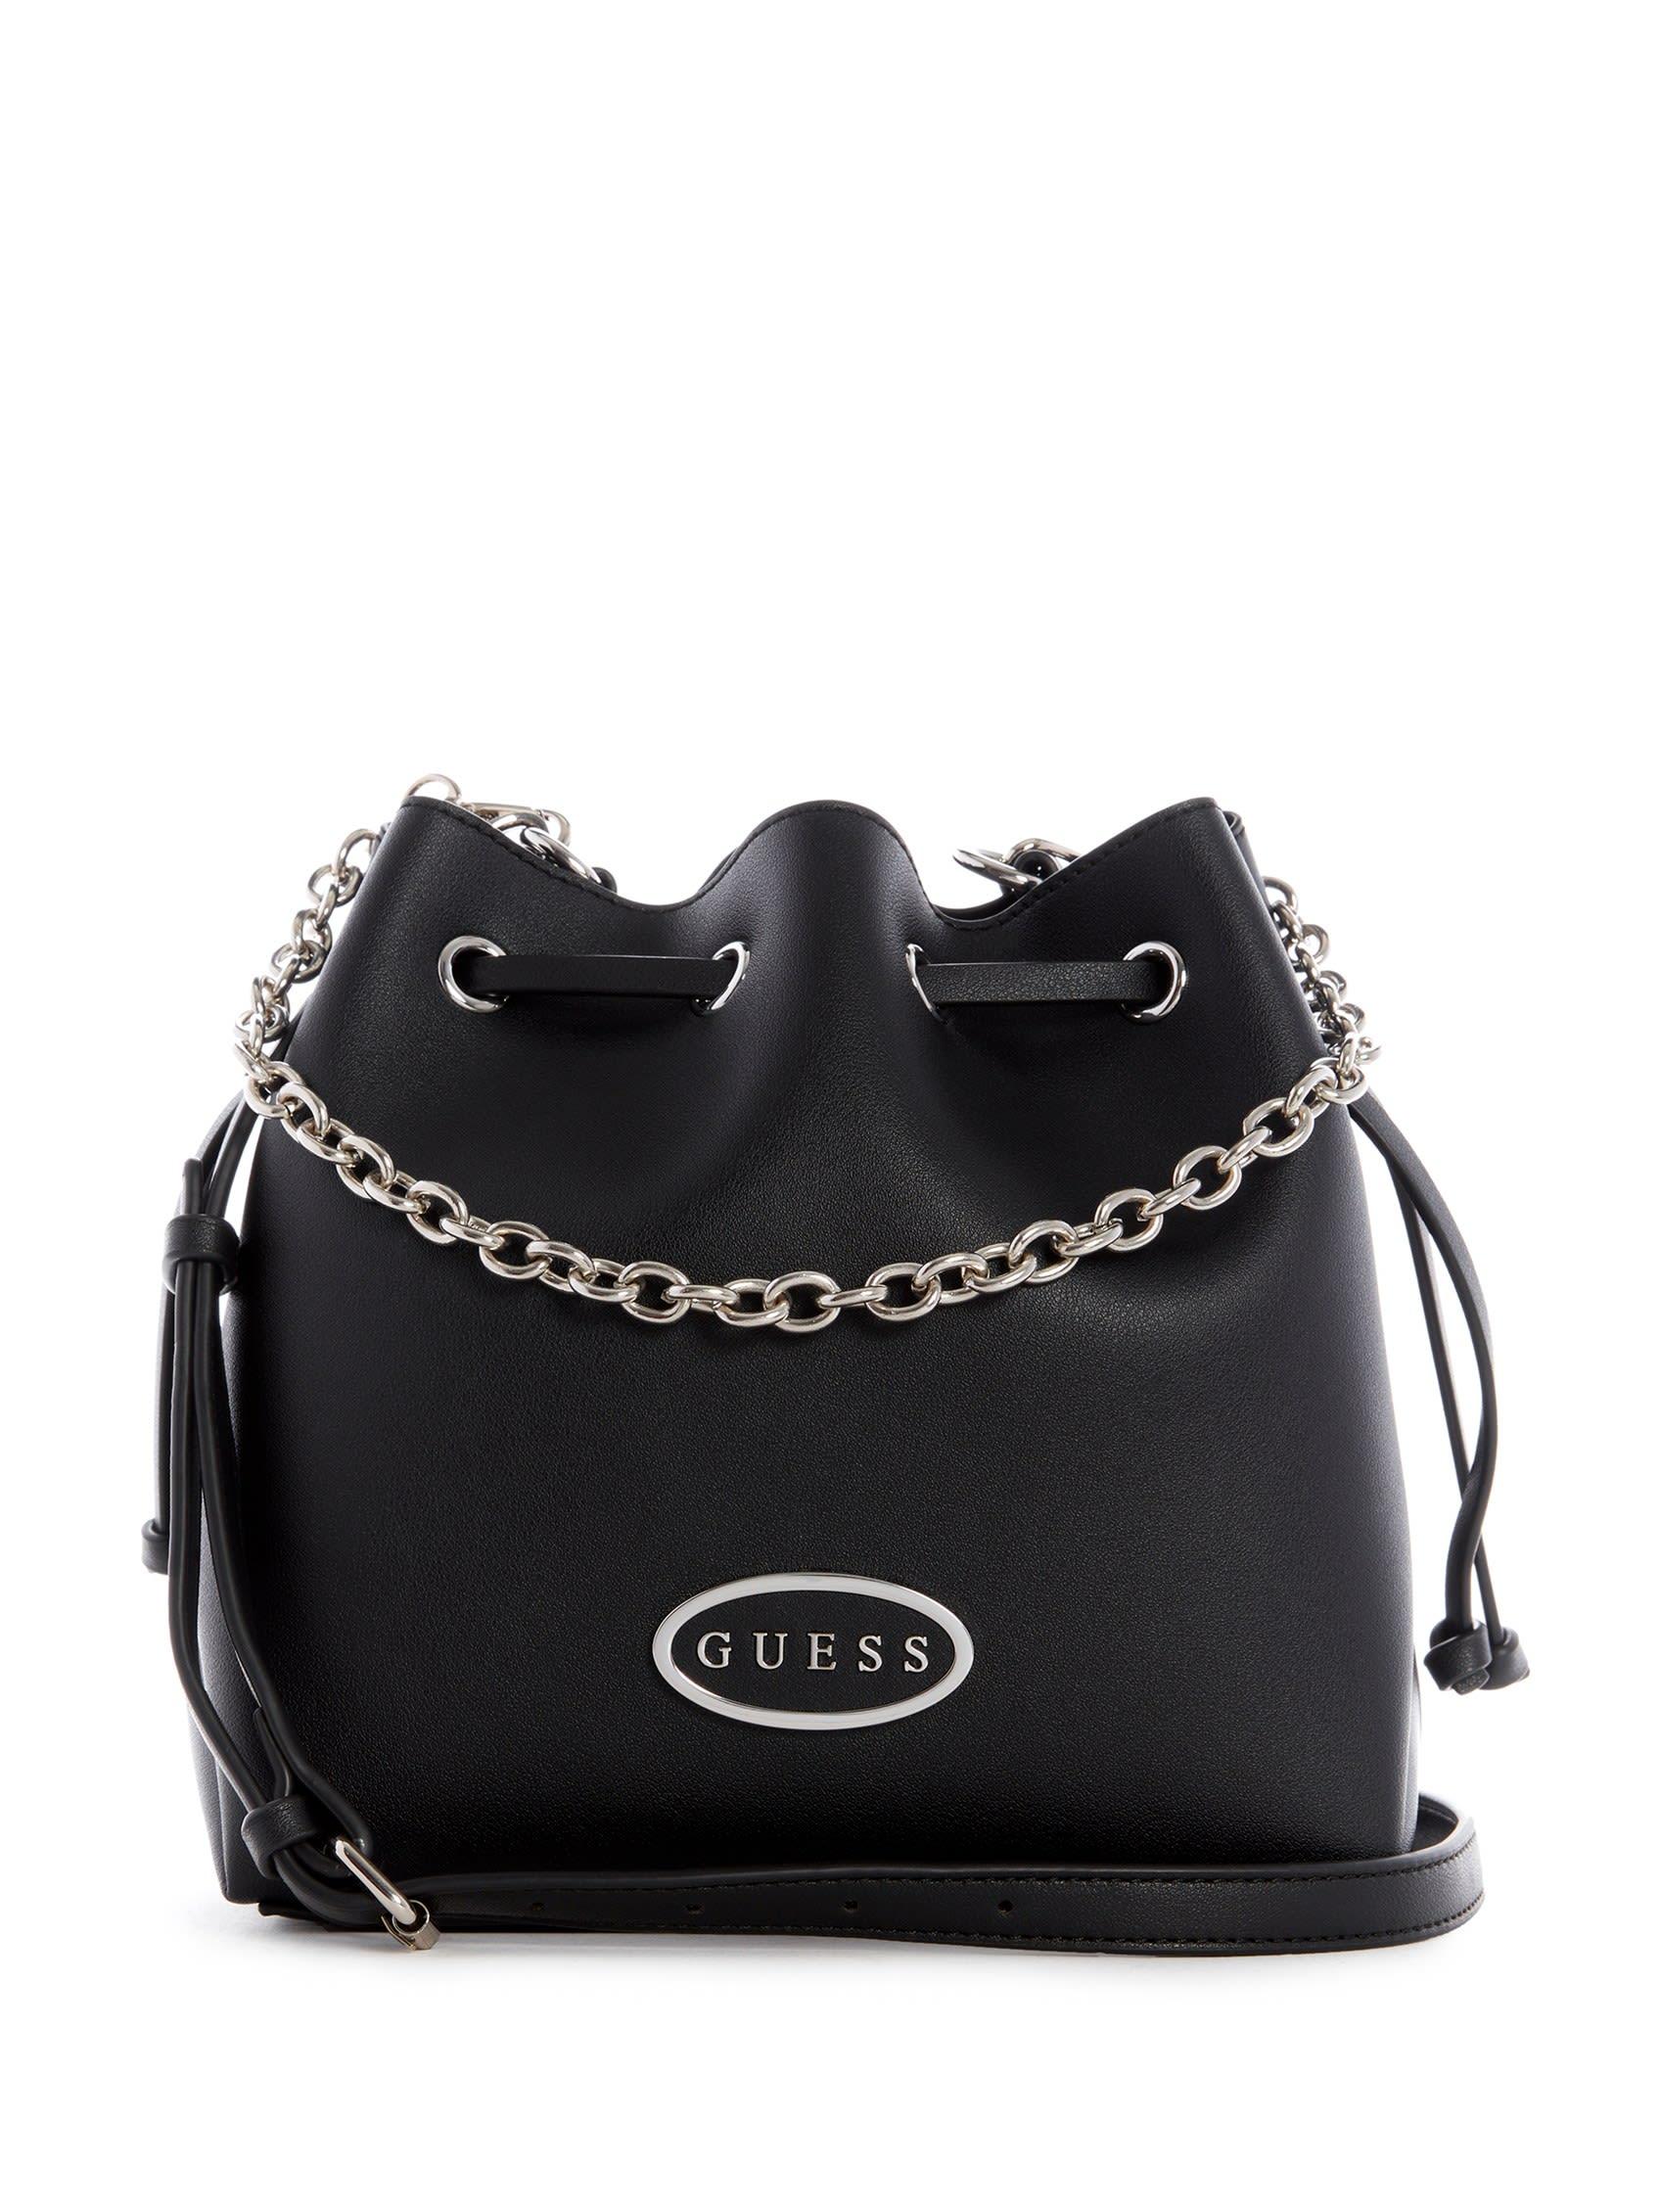 Guess Factory Dearborn Drawstring Bucket Bag in Black | Lyst